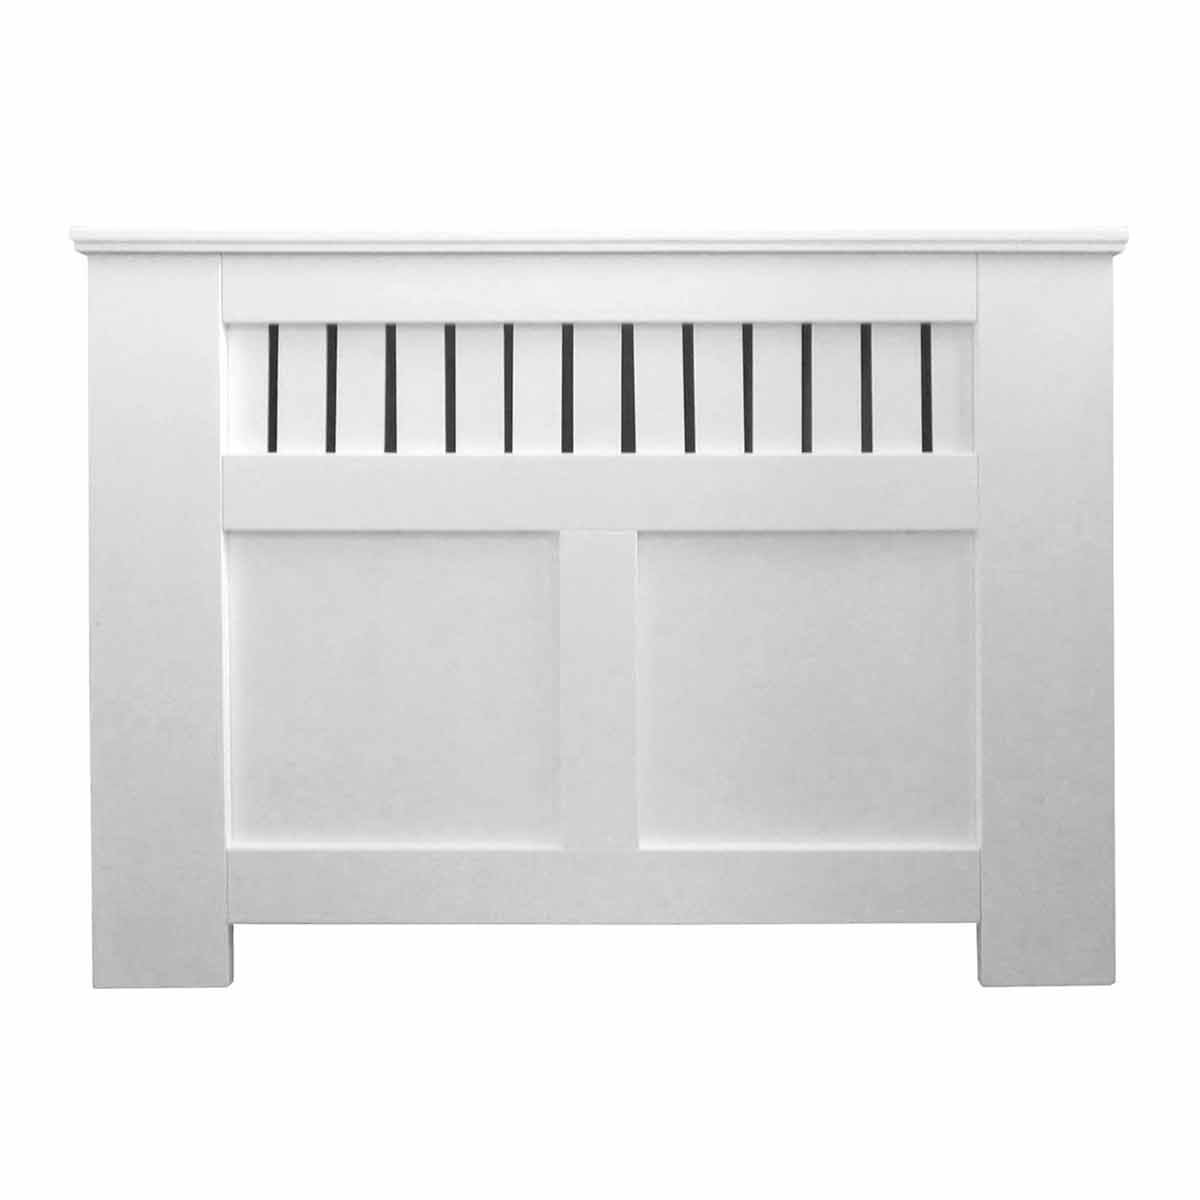 At Home Comforts Panel Painted White Radiator Cover Small